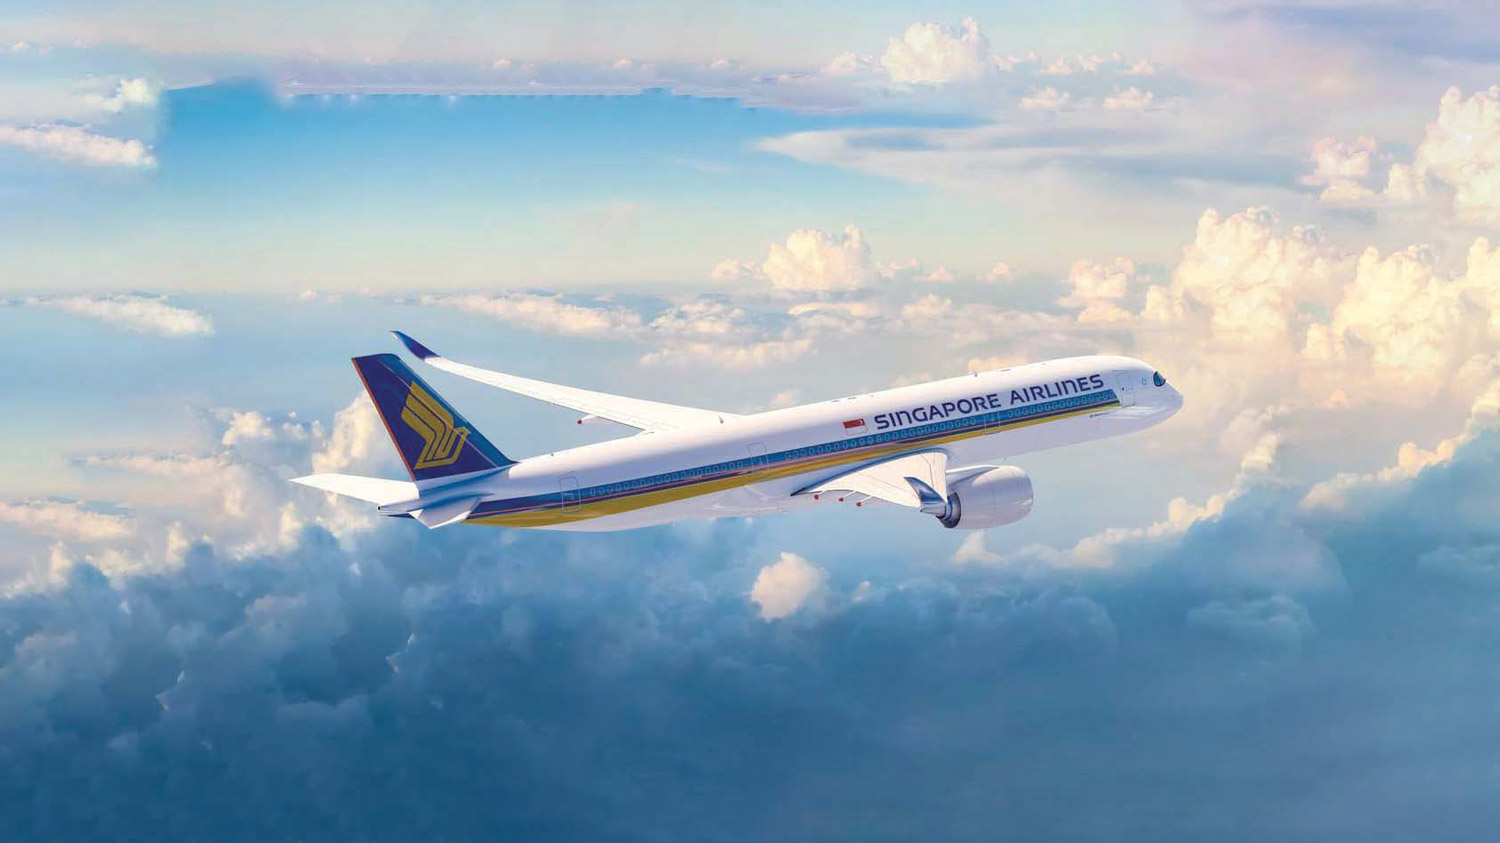 Singapore Airlines: The Gold List 2022 - World’s Best Airline